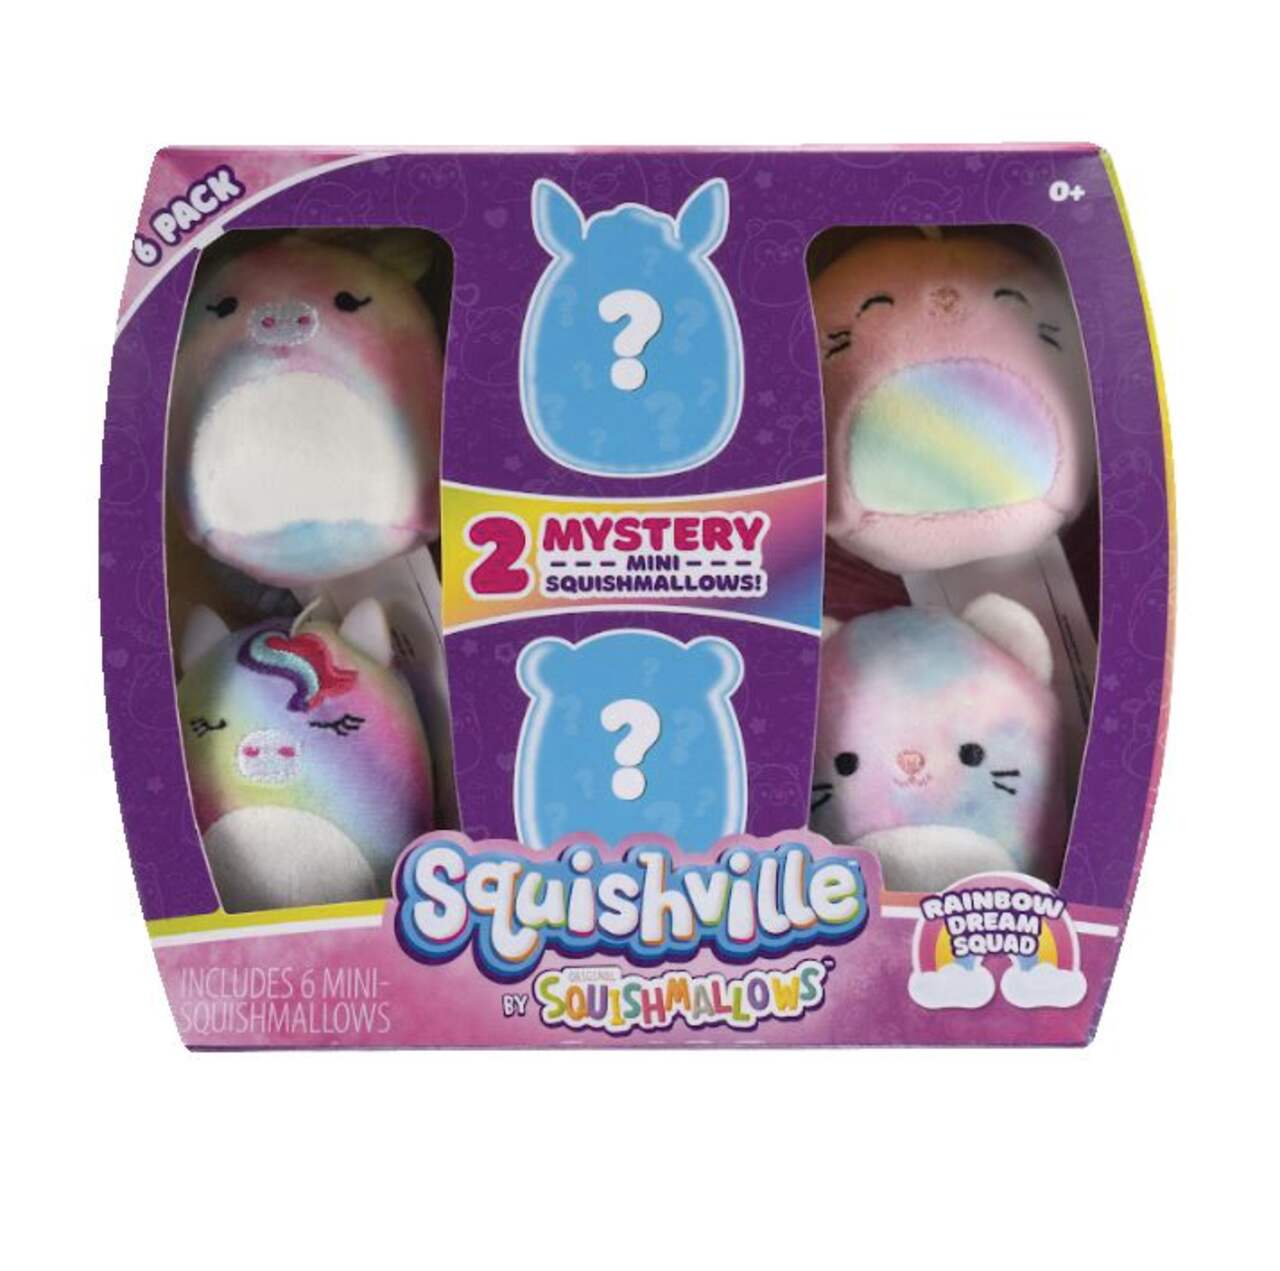 https://media-www.canadiantire.ca/product/seasonal-gardening/toys/preschool-toys-activities/0508855/squishville-by-squishmallows-6-pack-asst-52b0d535-439e-40a7-97f8-0f000e80ebe3-jpgrendition.jpg?imdensity=1&imwidth=640&impolicy=mZoom